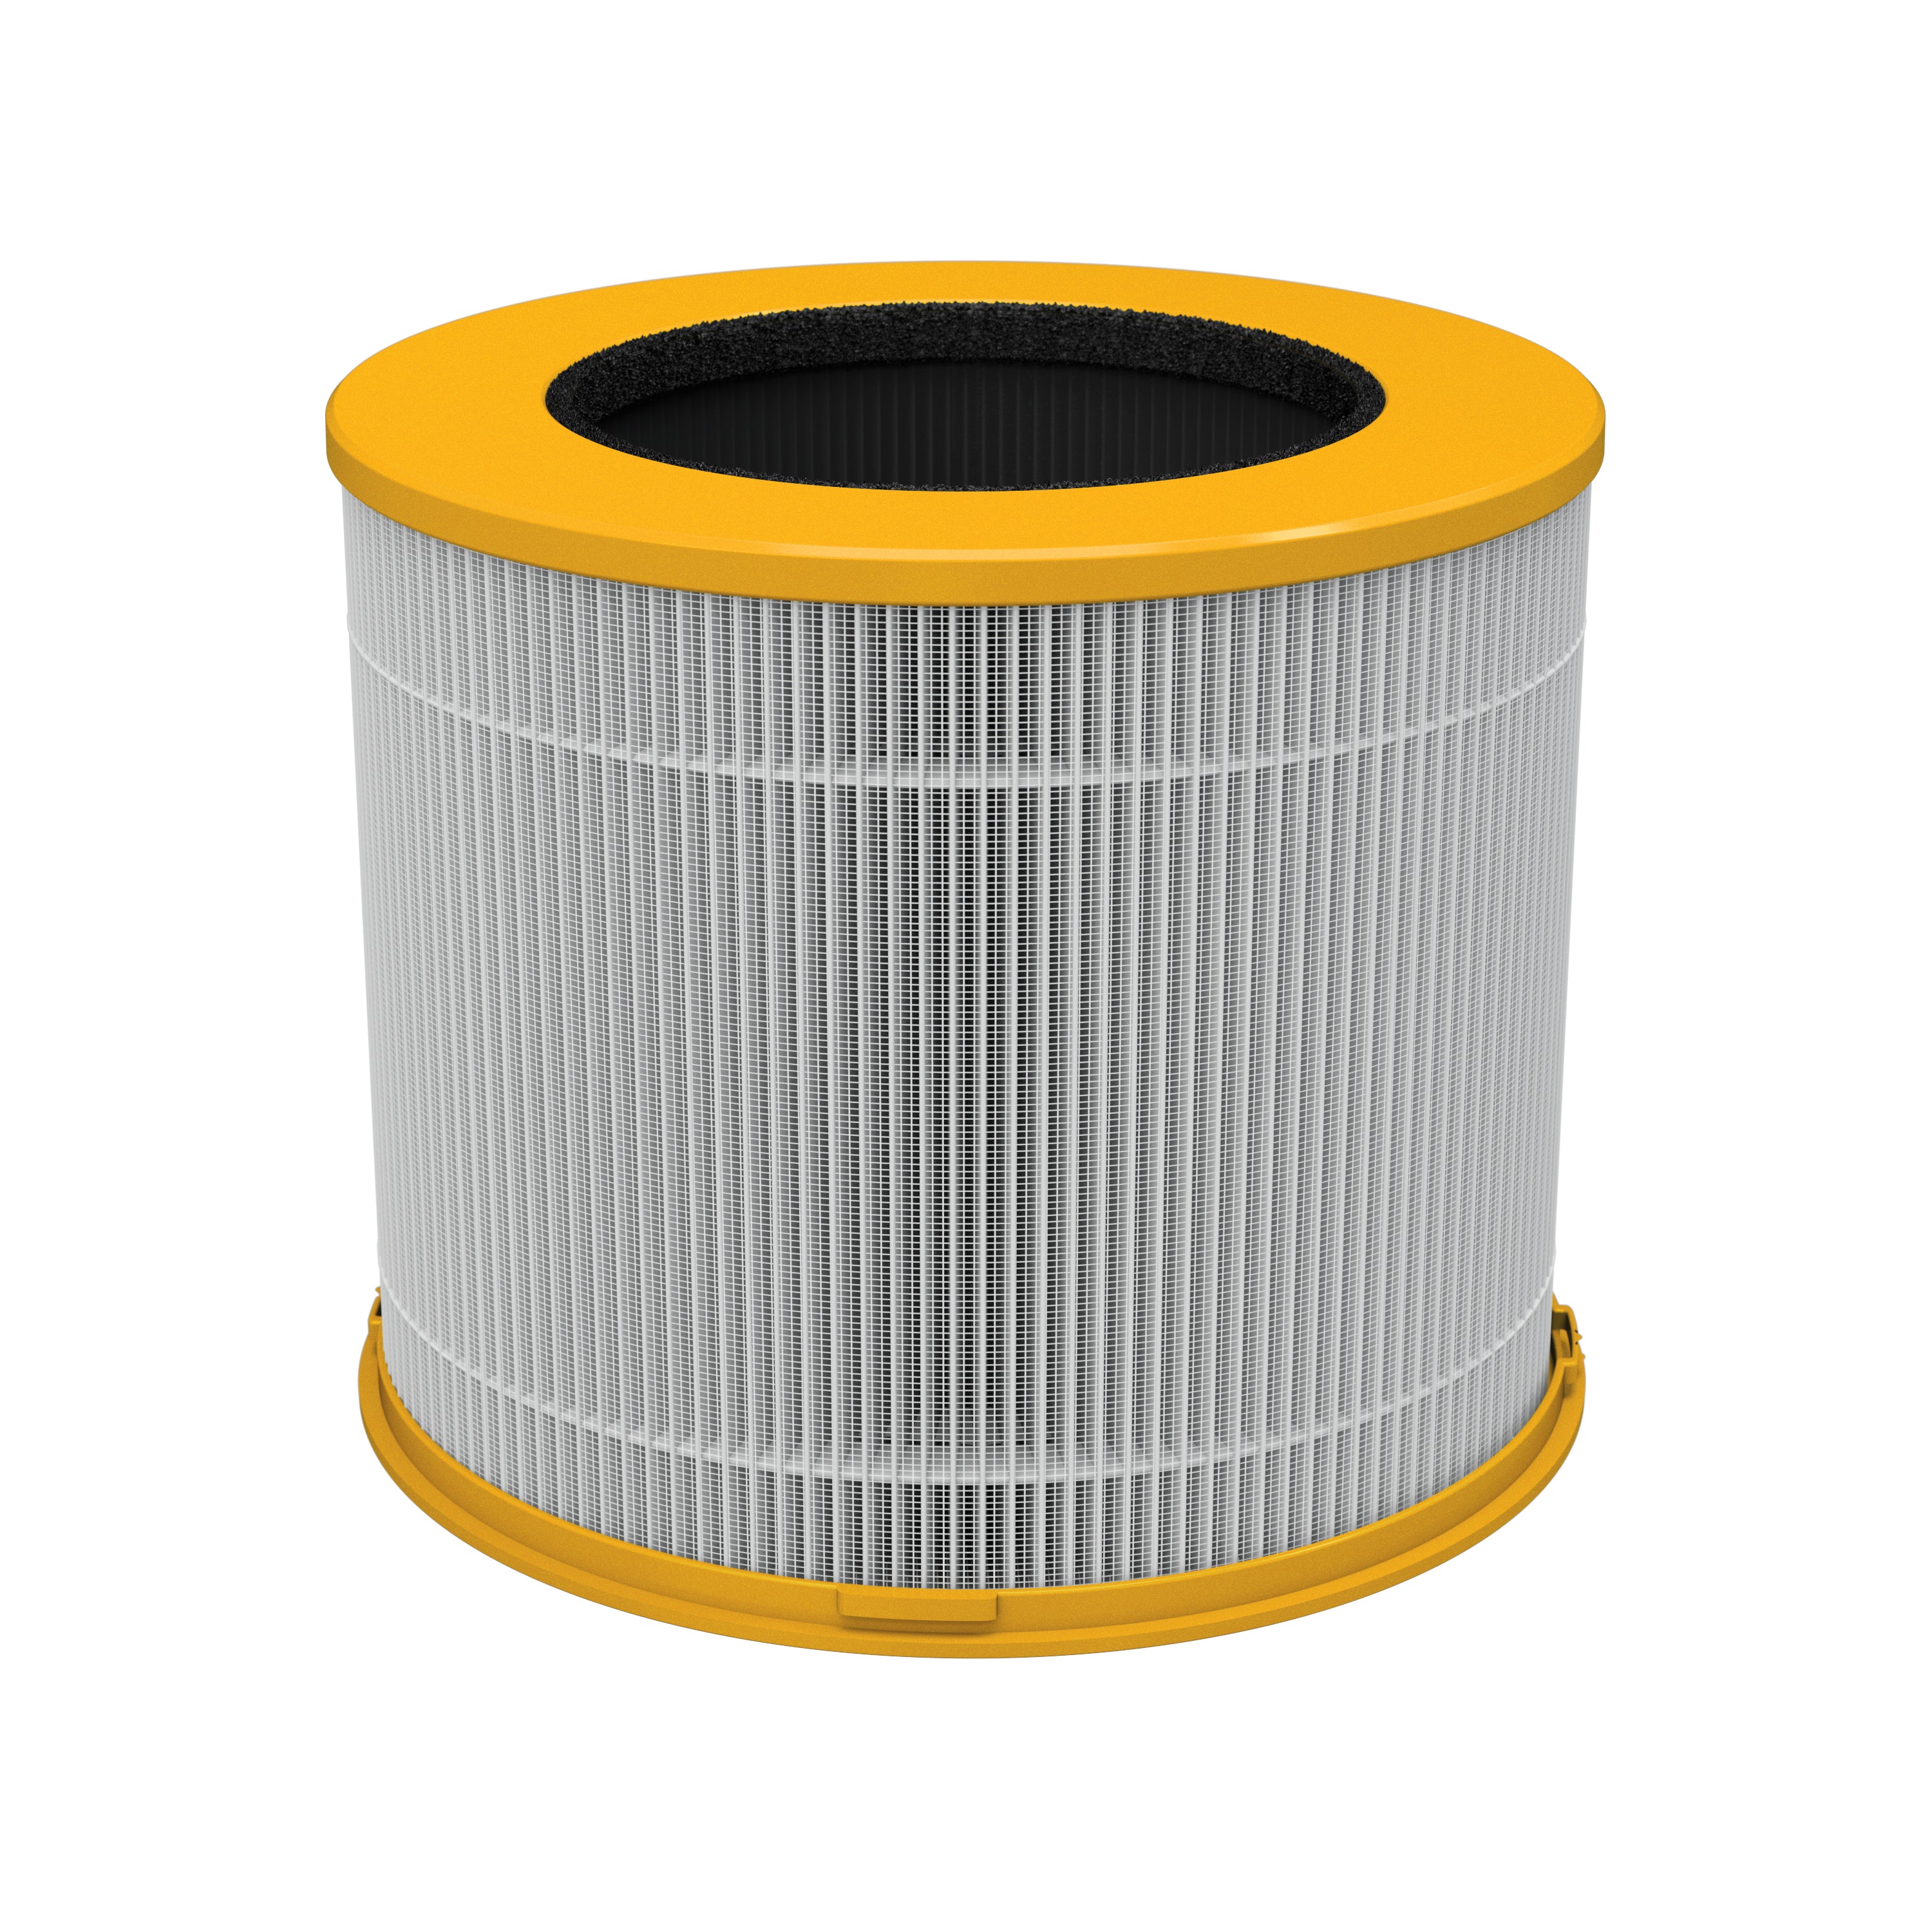 Dirt Devil Air Purifier Filter showcased in front of a white background